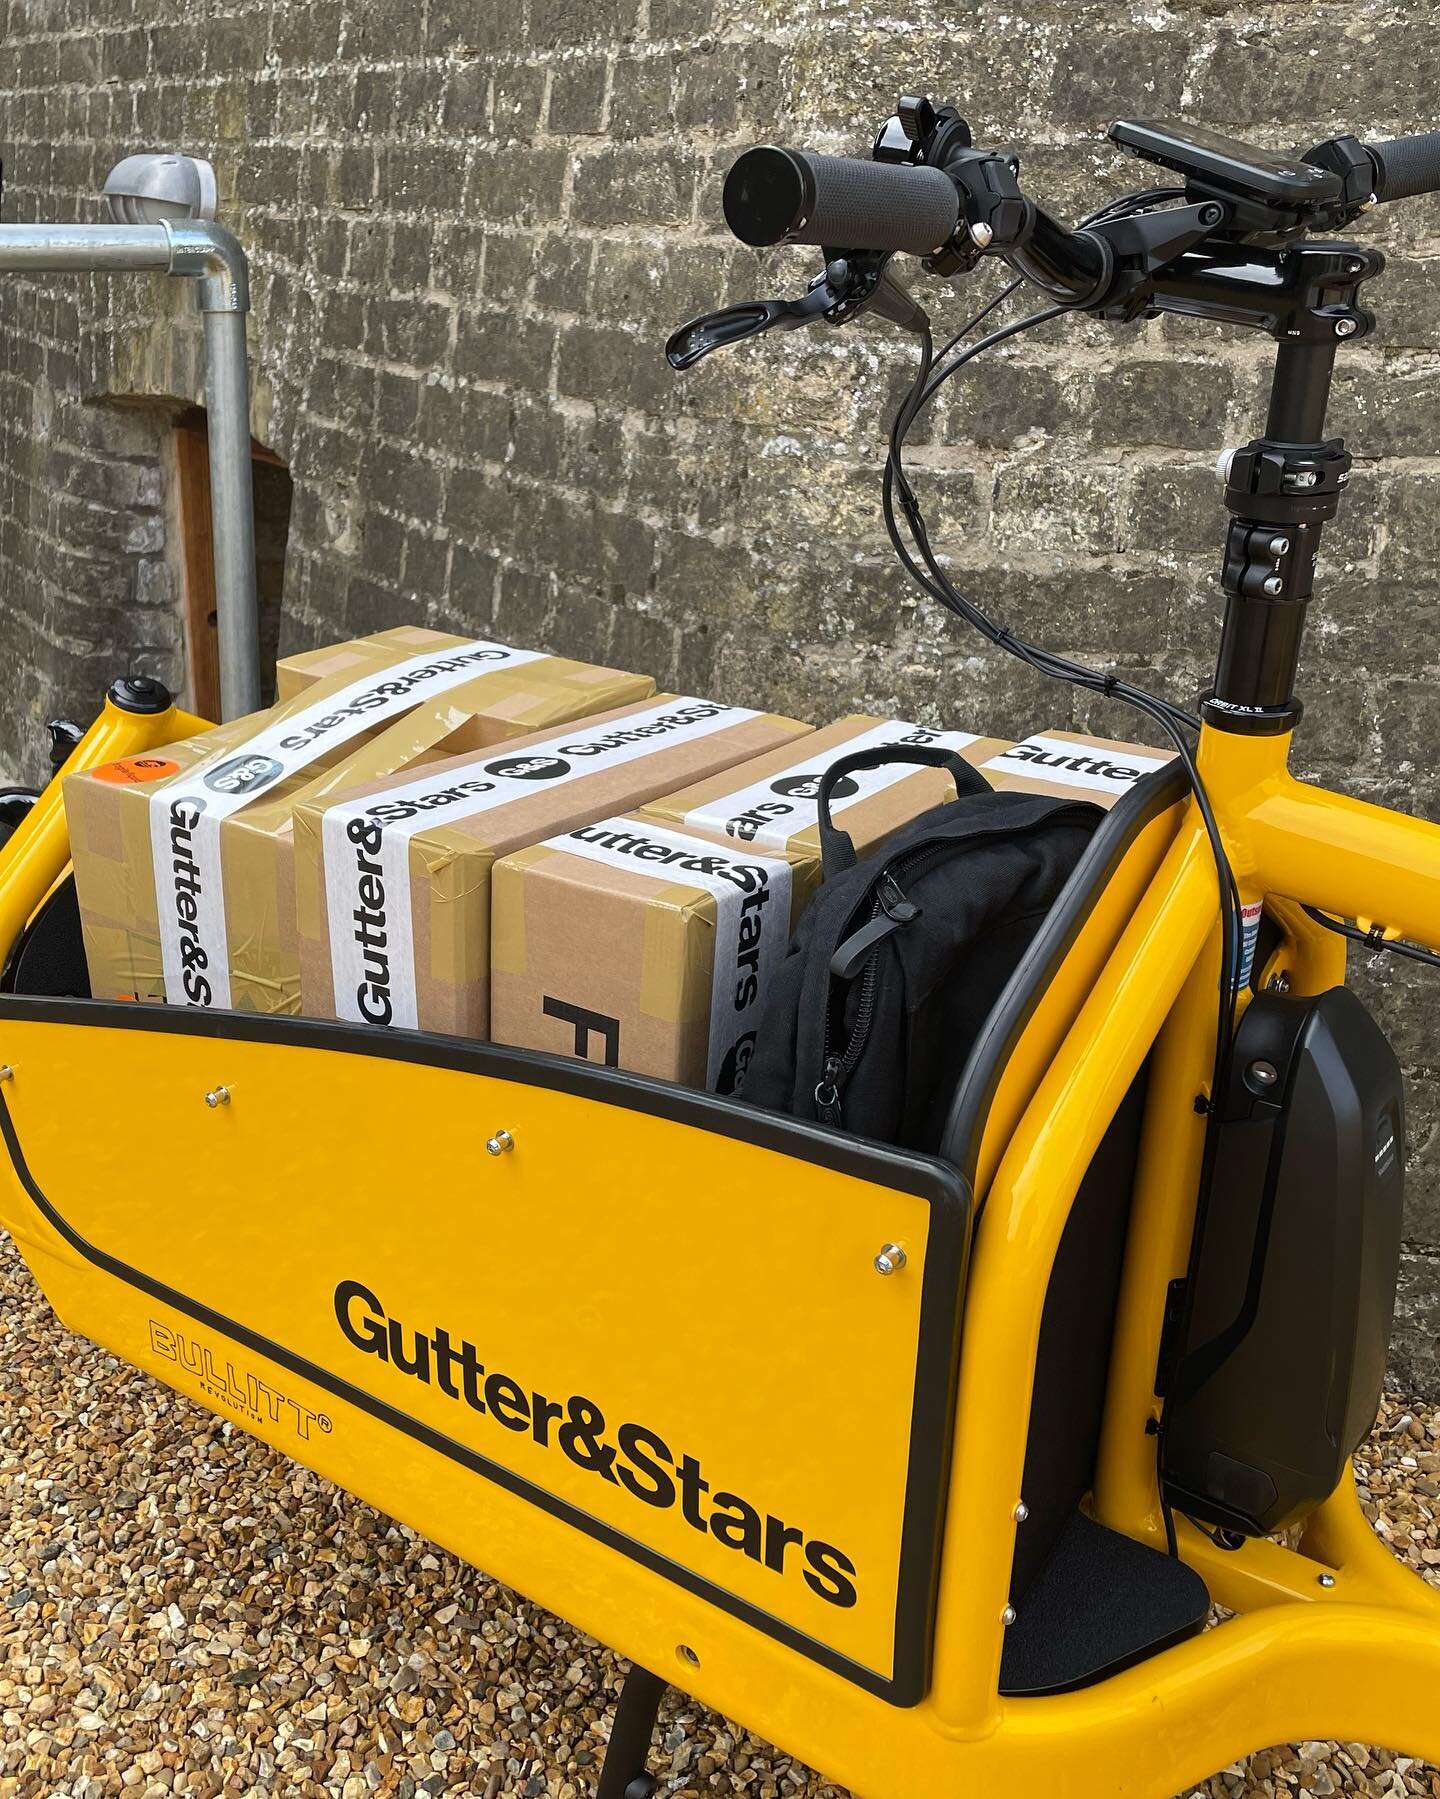 Delivery day. All local deliveries are now going out on the Bullitt bike.

Courier deliveries are being dropped off at the local APC depot on the bike too. 

Win win. Better for the planet and the waistline. 

The Good Mixer white blend is still avai